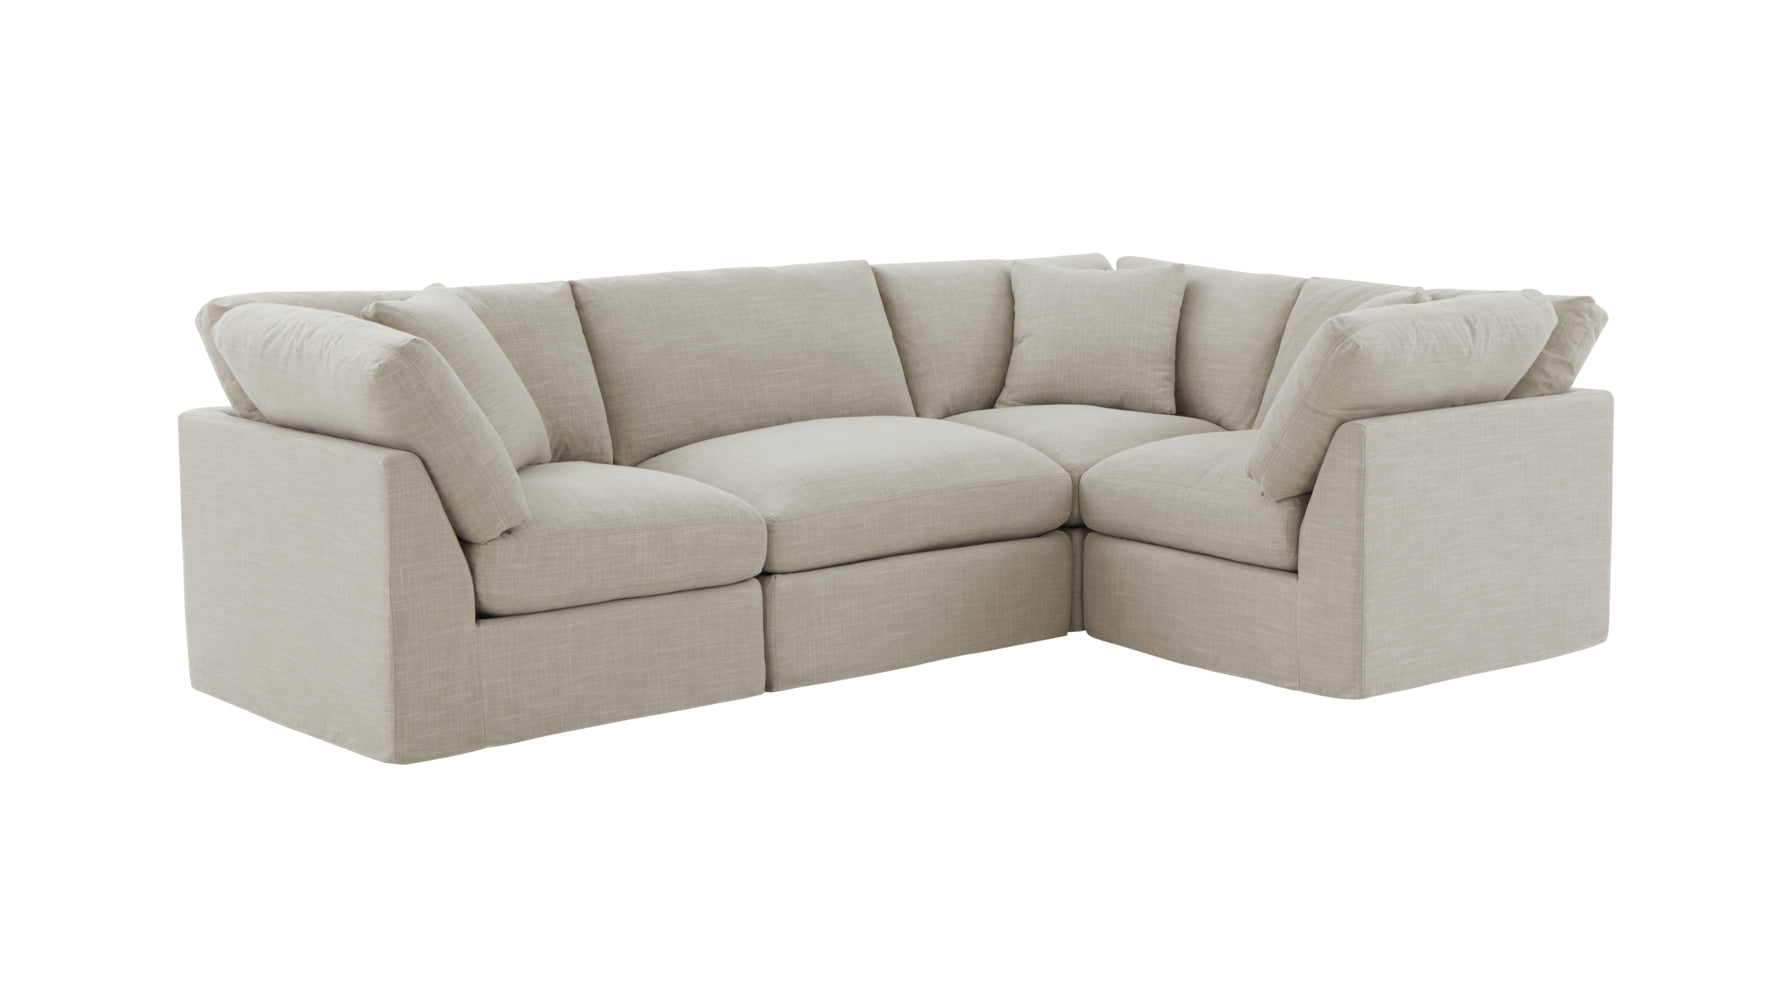 Get Together™ 4-Piece Modular Sectional Closed, Standard, Light Pebble - Image 2